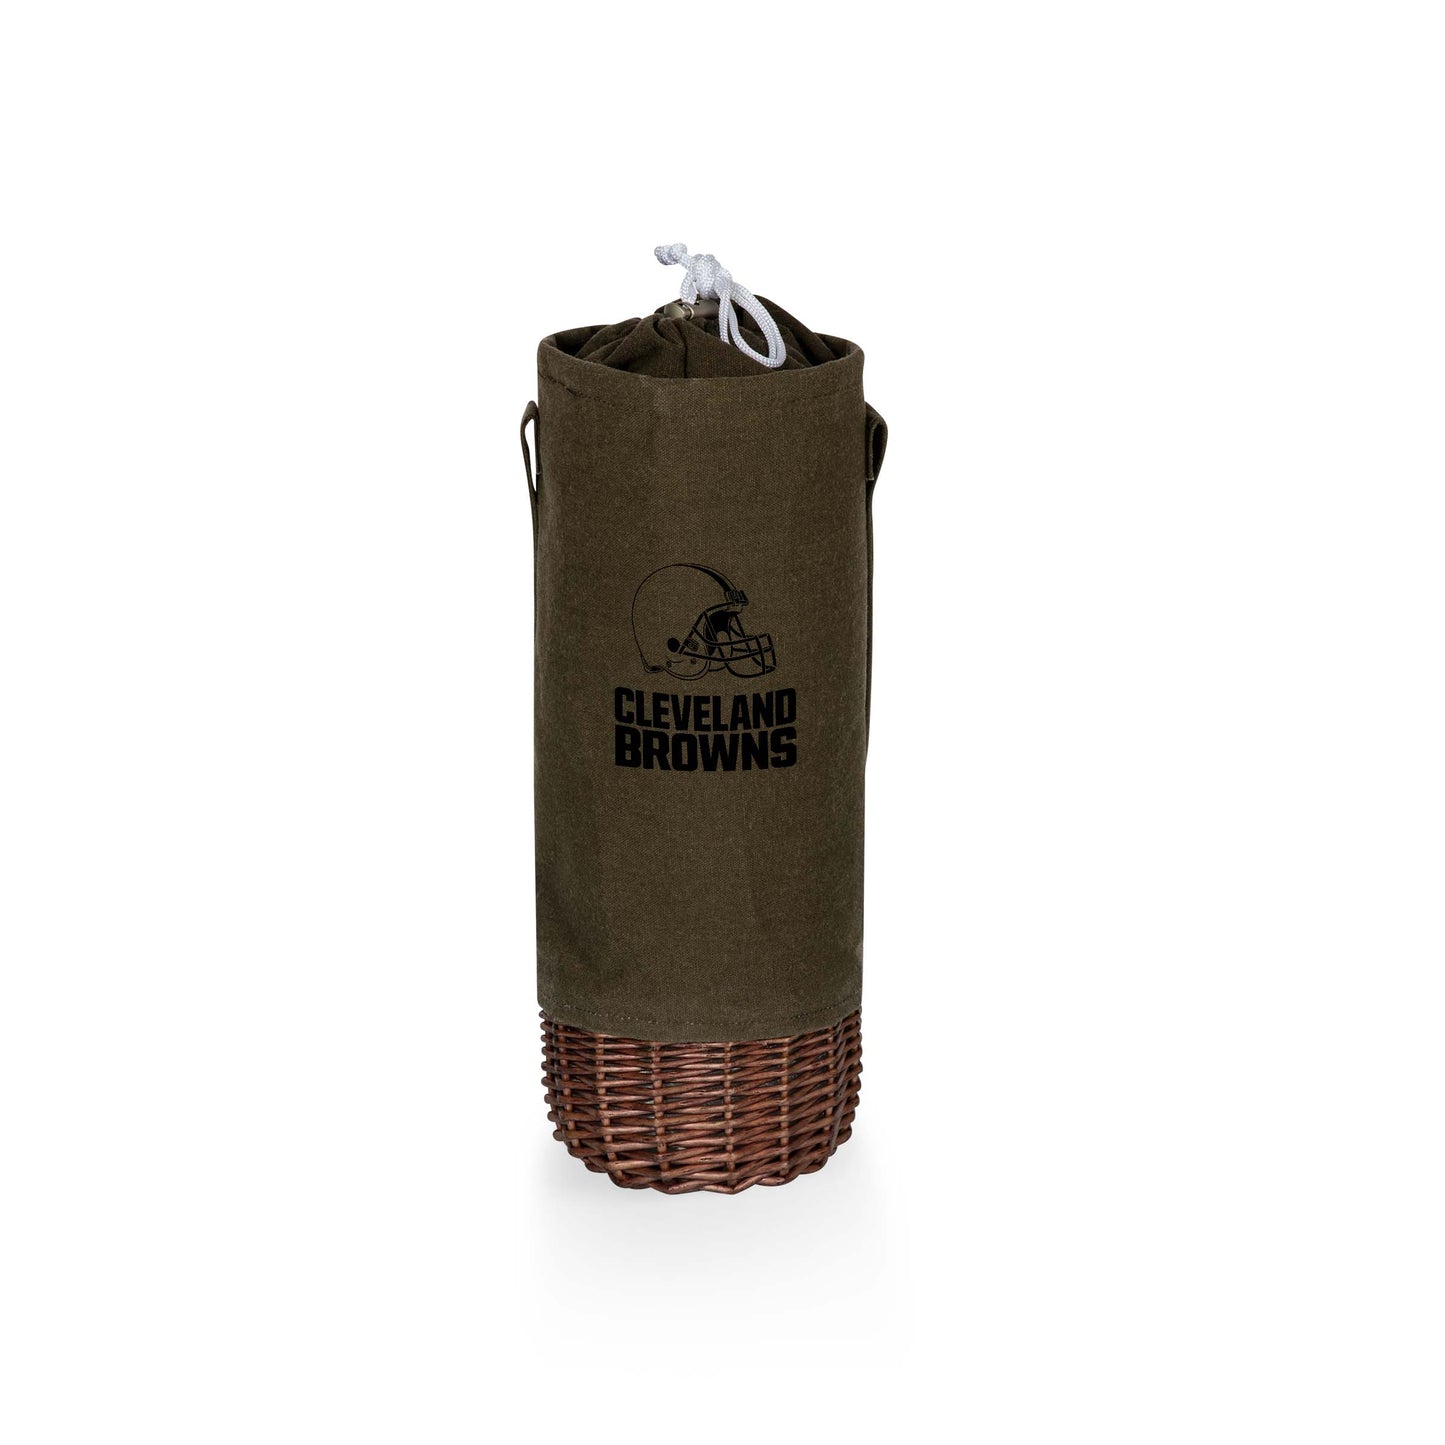 Cleveland Browns - Malbec Insulated Canvas and Willow Wine Bottle Basket